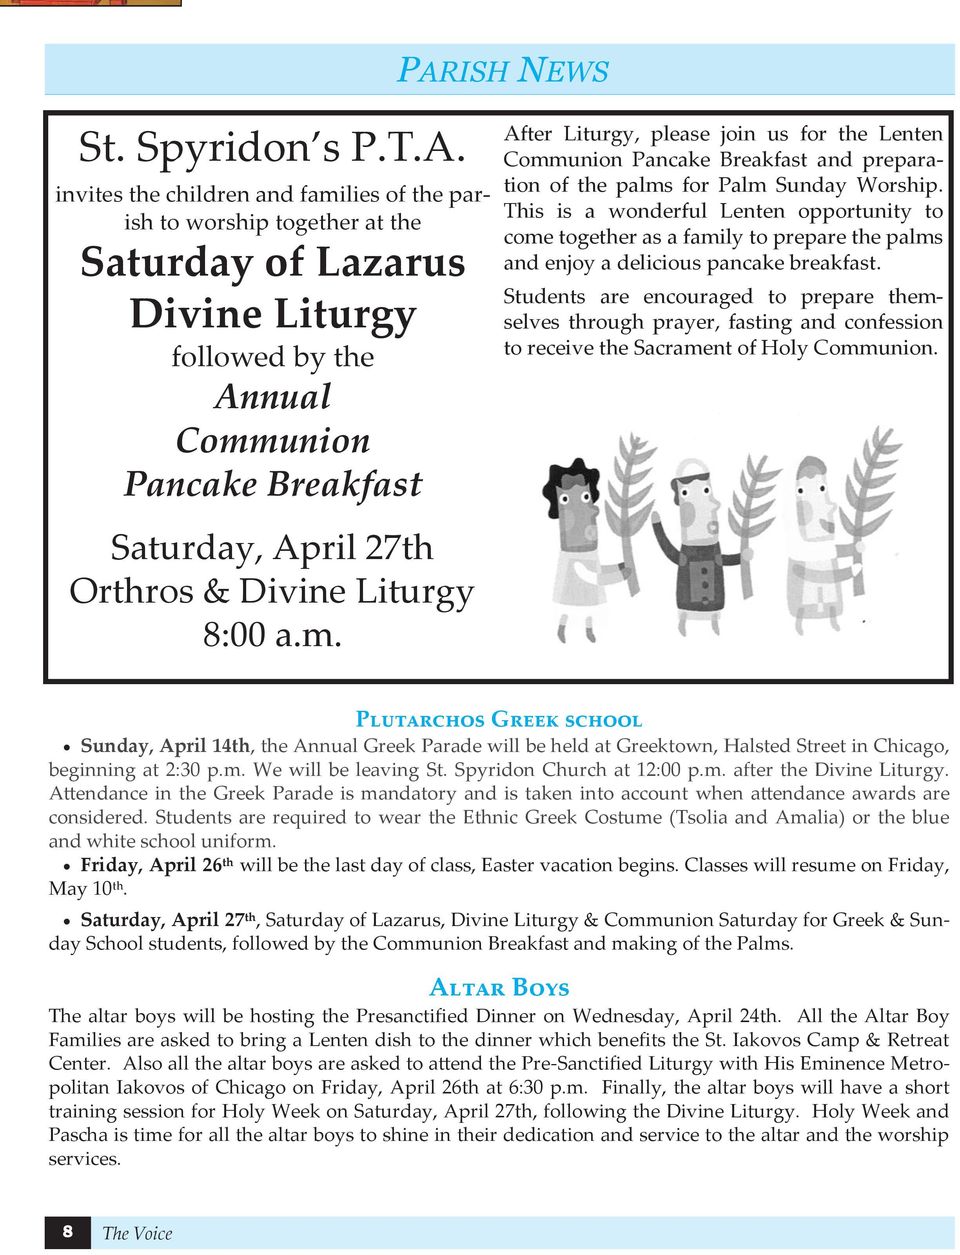 This is a wonderful Lenten opportunity to come together as a family to prepare the palms and enjoy a delicious pancake breakfast.